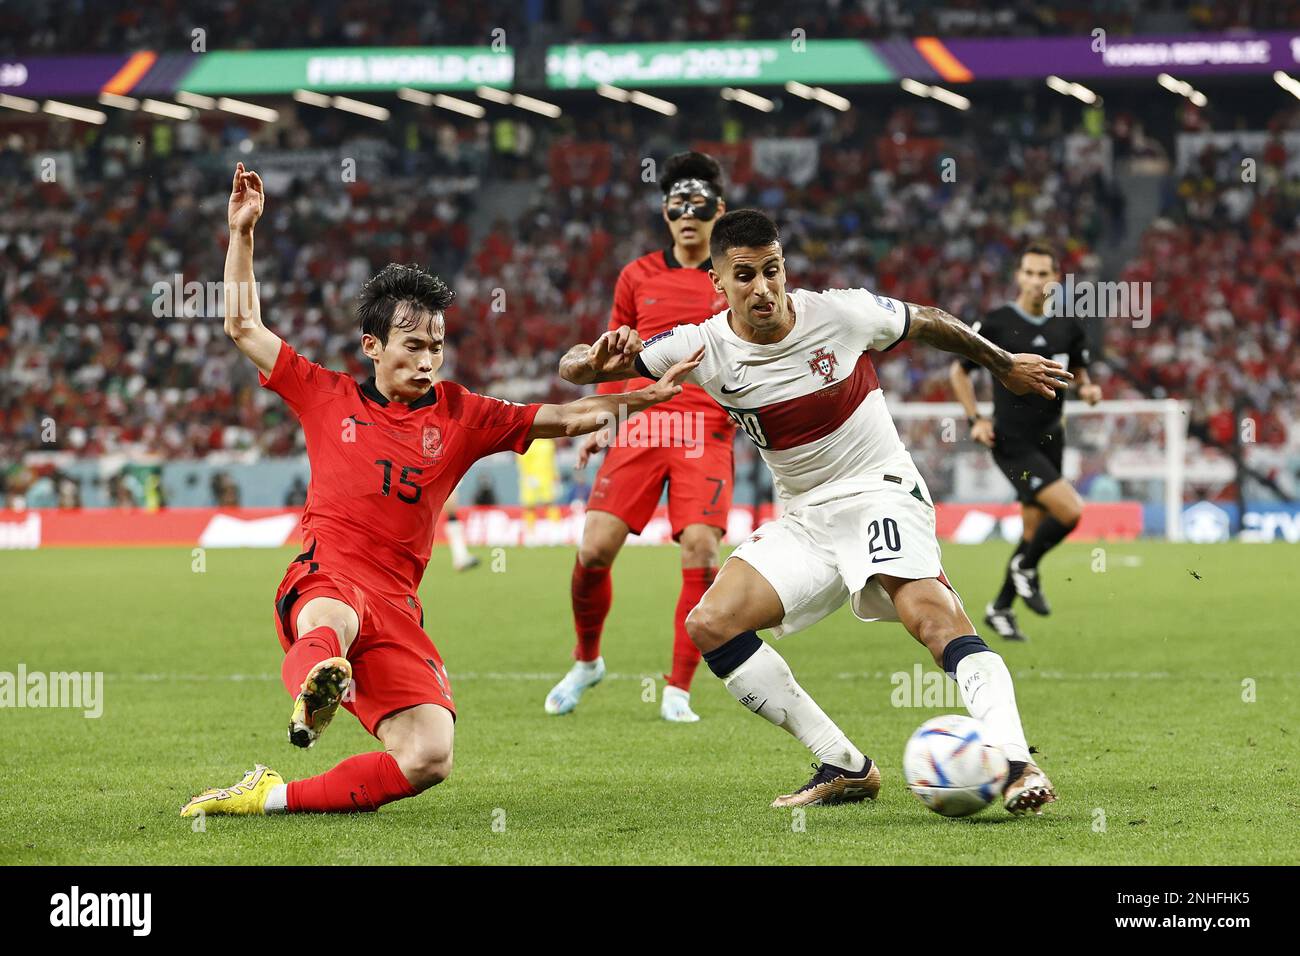 DOHA - (l-r) Moon-hwan Kim of Korea Republic, Joao Cancelo of Portugal during the FIFA World Cup Qatar 2022 group H match between South Korea and Portugal at Education City Stadium on December 2, 2022 in Doha, Qatar. AP | Dutch Height | MAURICE OF STONE Stock Photo